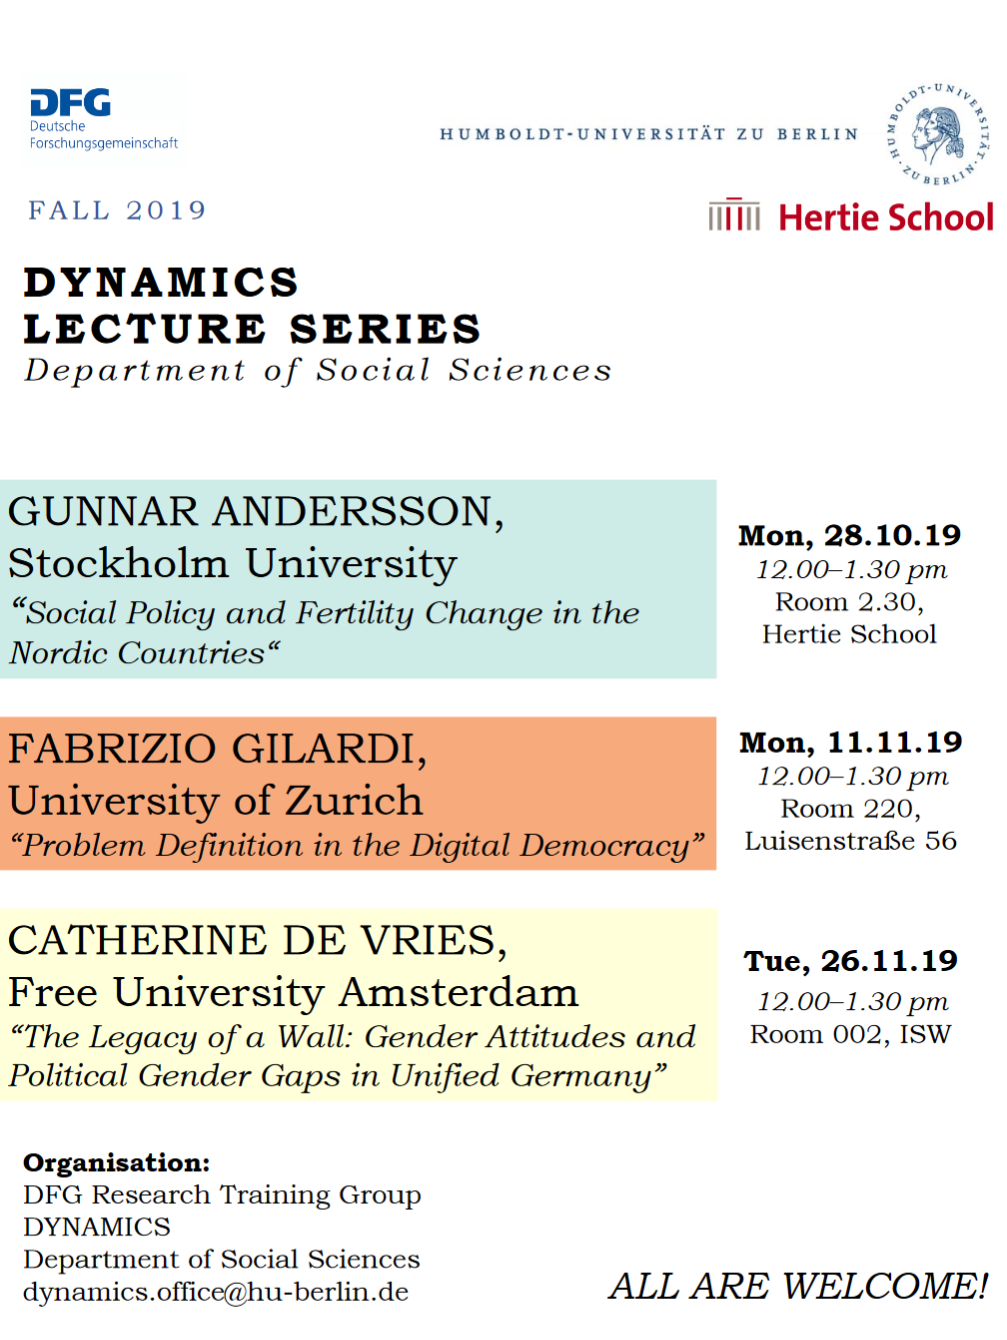 DYNAMICS Lecture Series Poster.jpg